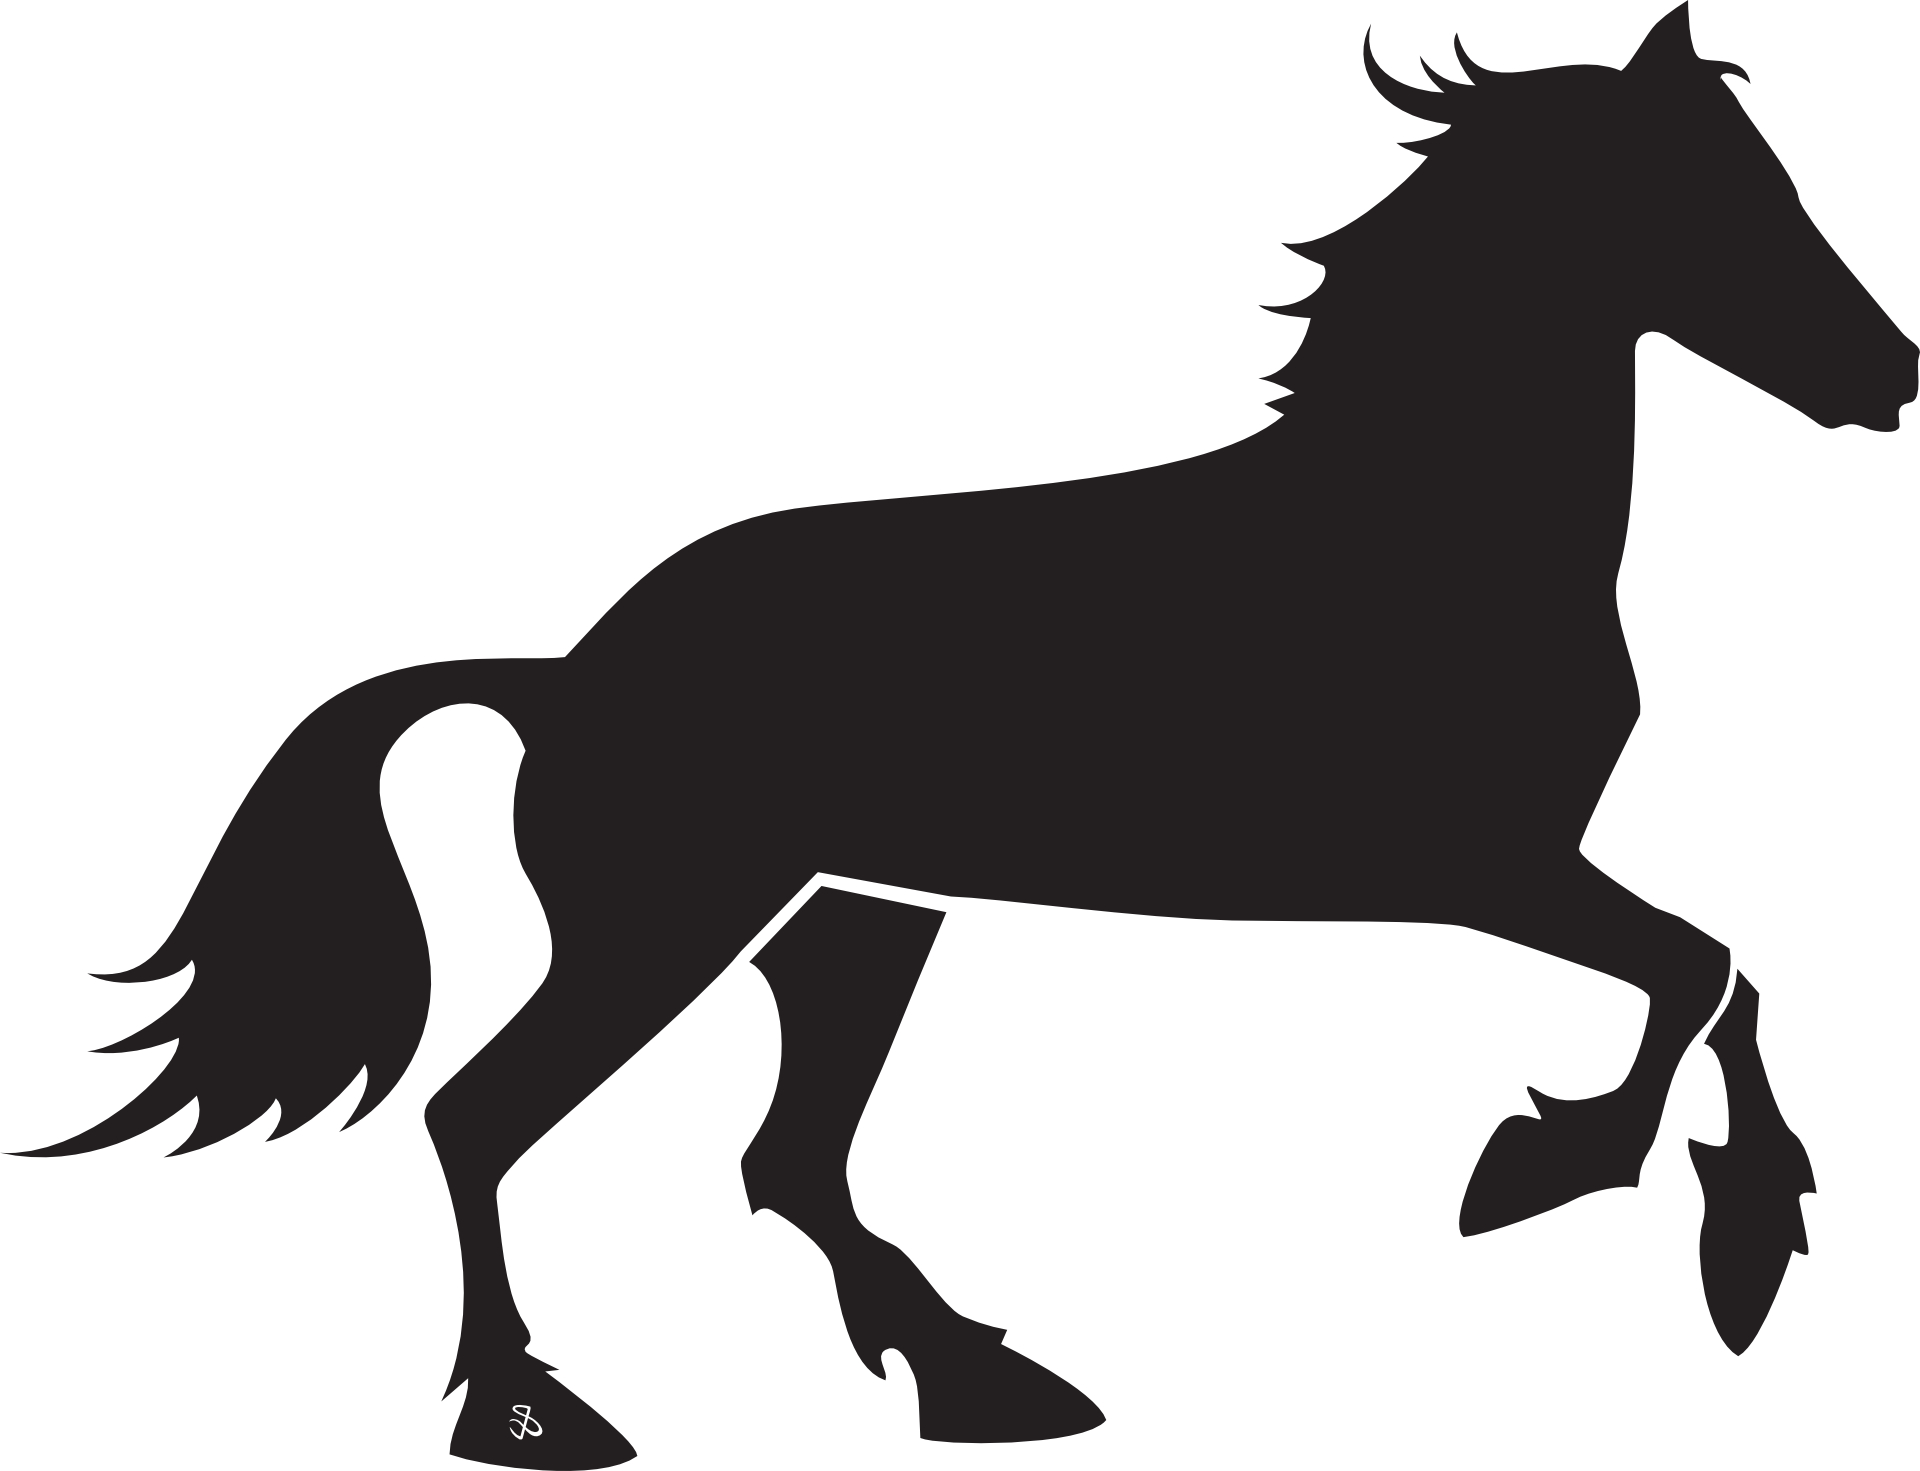 Running Horse Silhouette Vector   Clipart Panda   Free Clipart Images